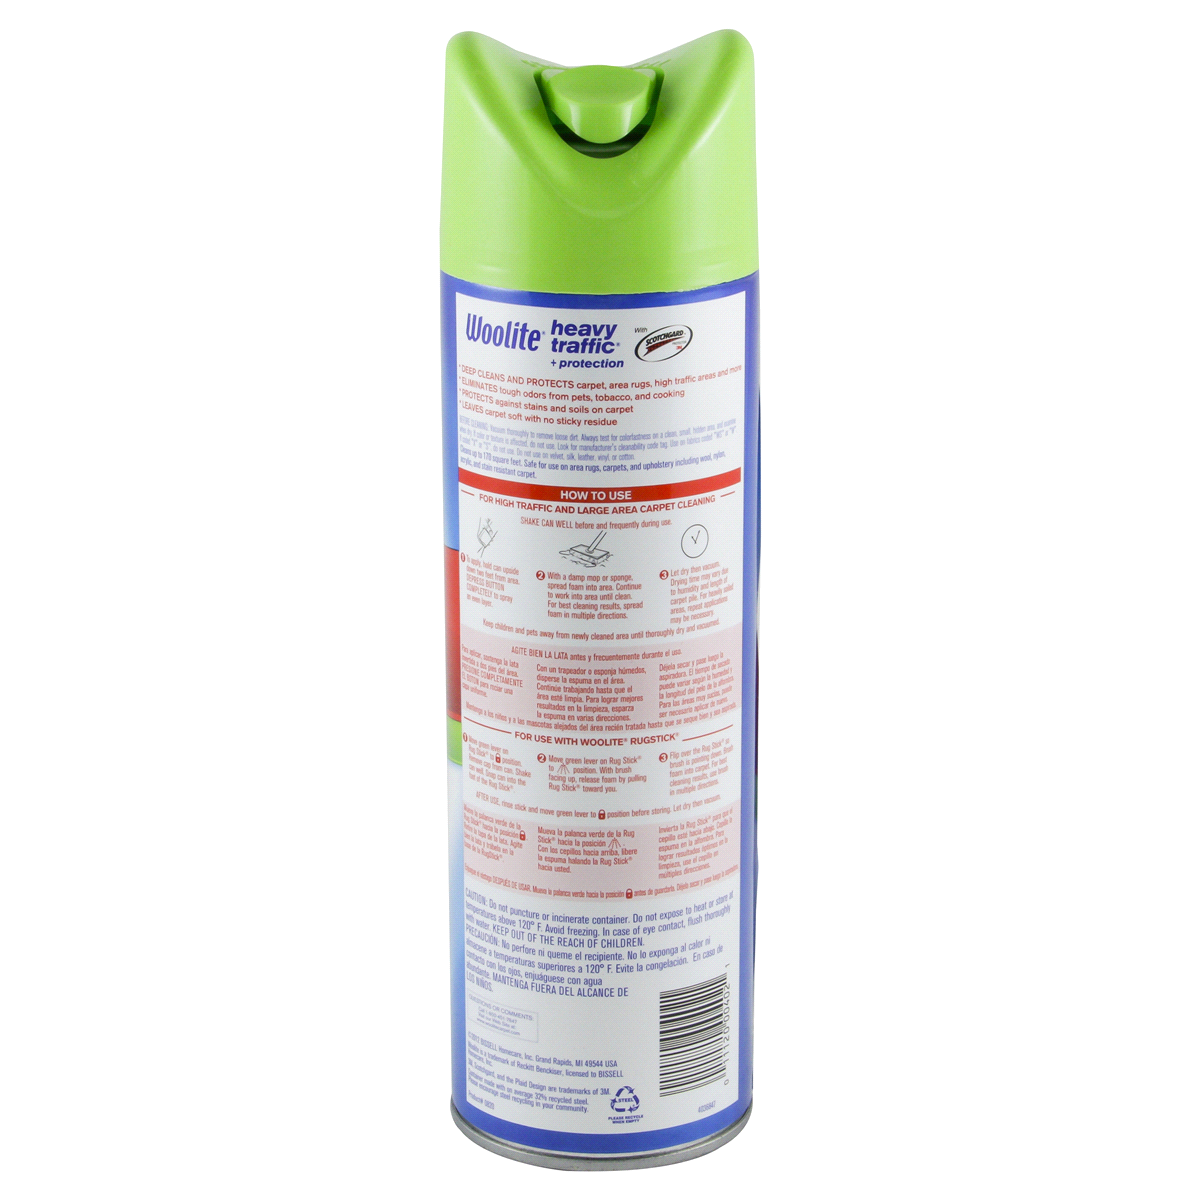 Woolite Foam Fabric & Upholstery Cleaner